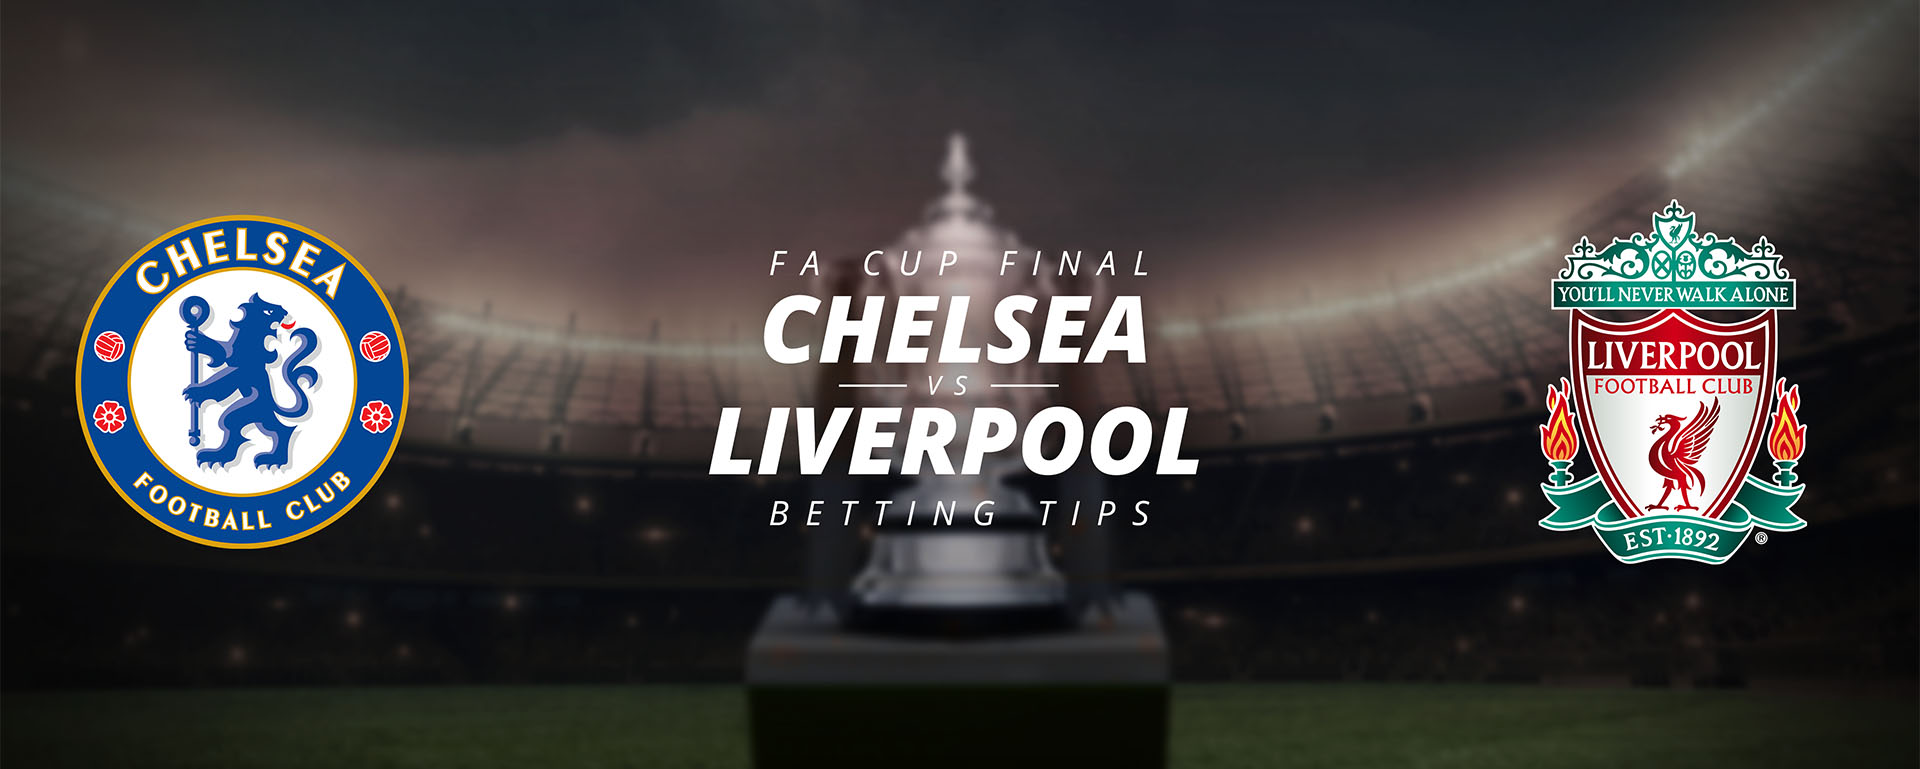 FA CUP FINAL: CHESLEA VS LIVERPOOL: BETTING TIPS